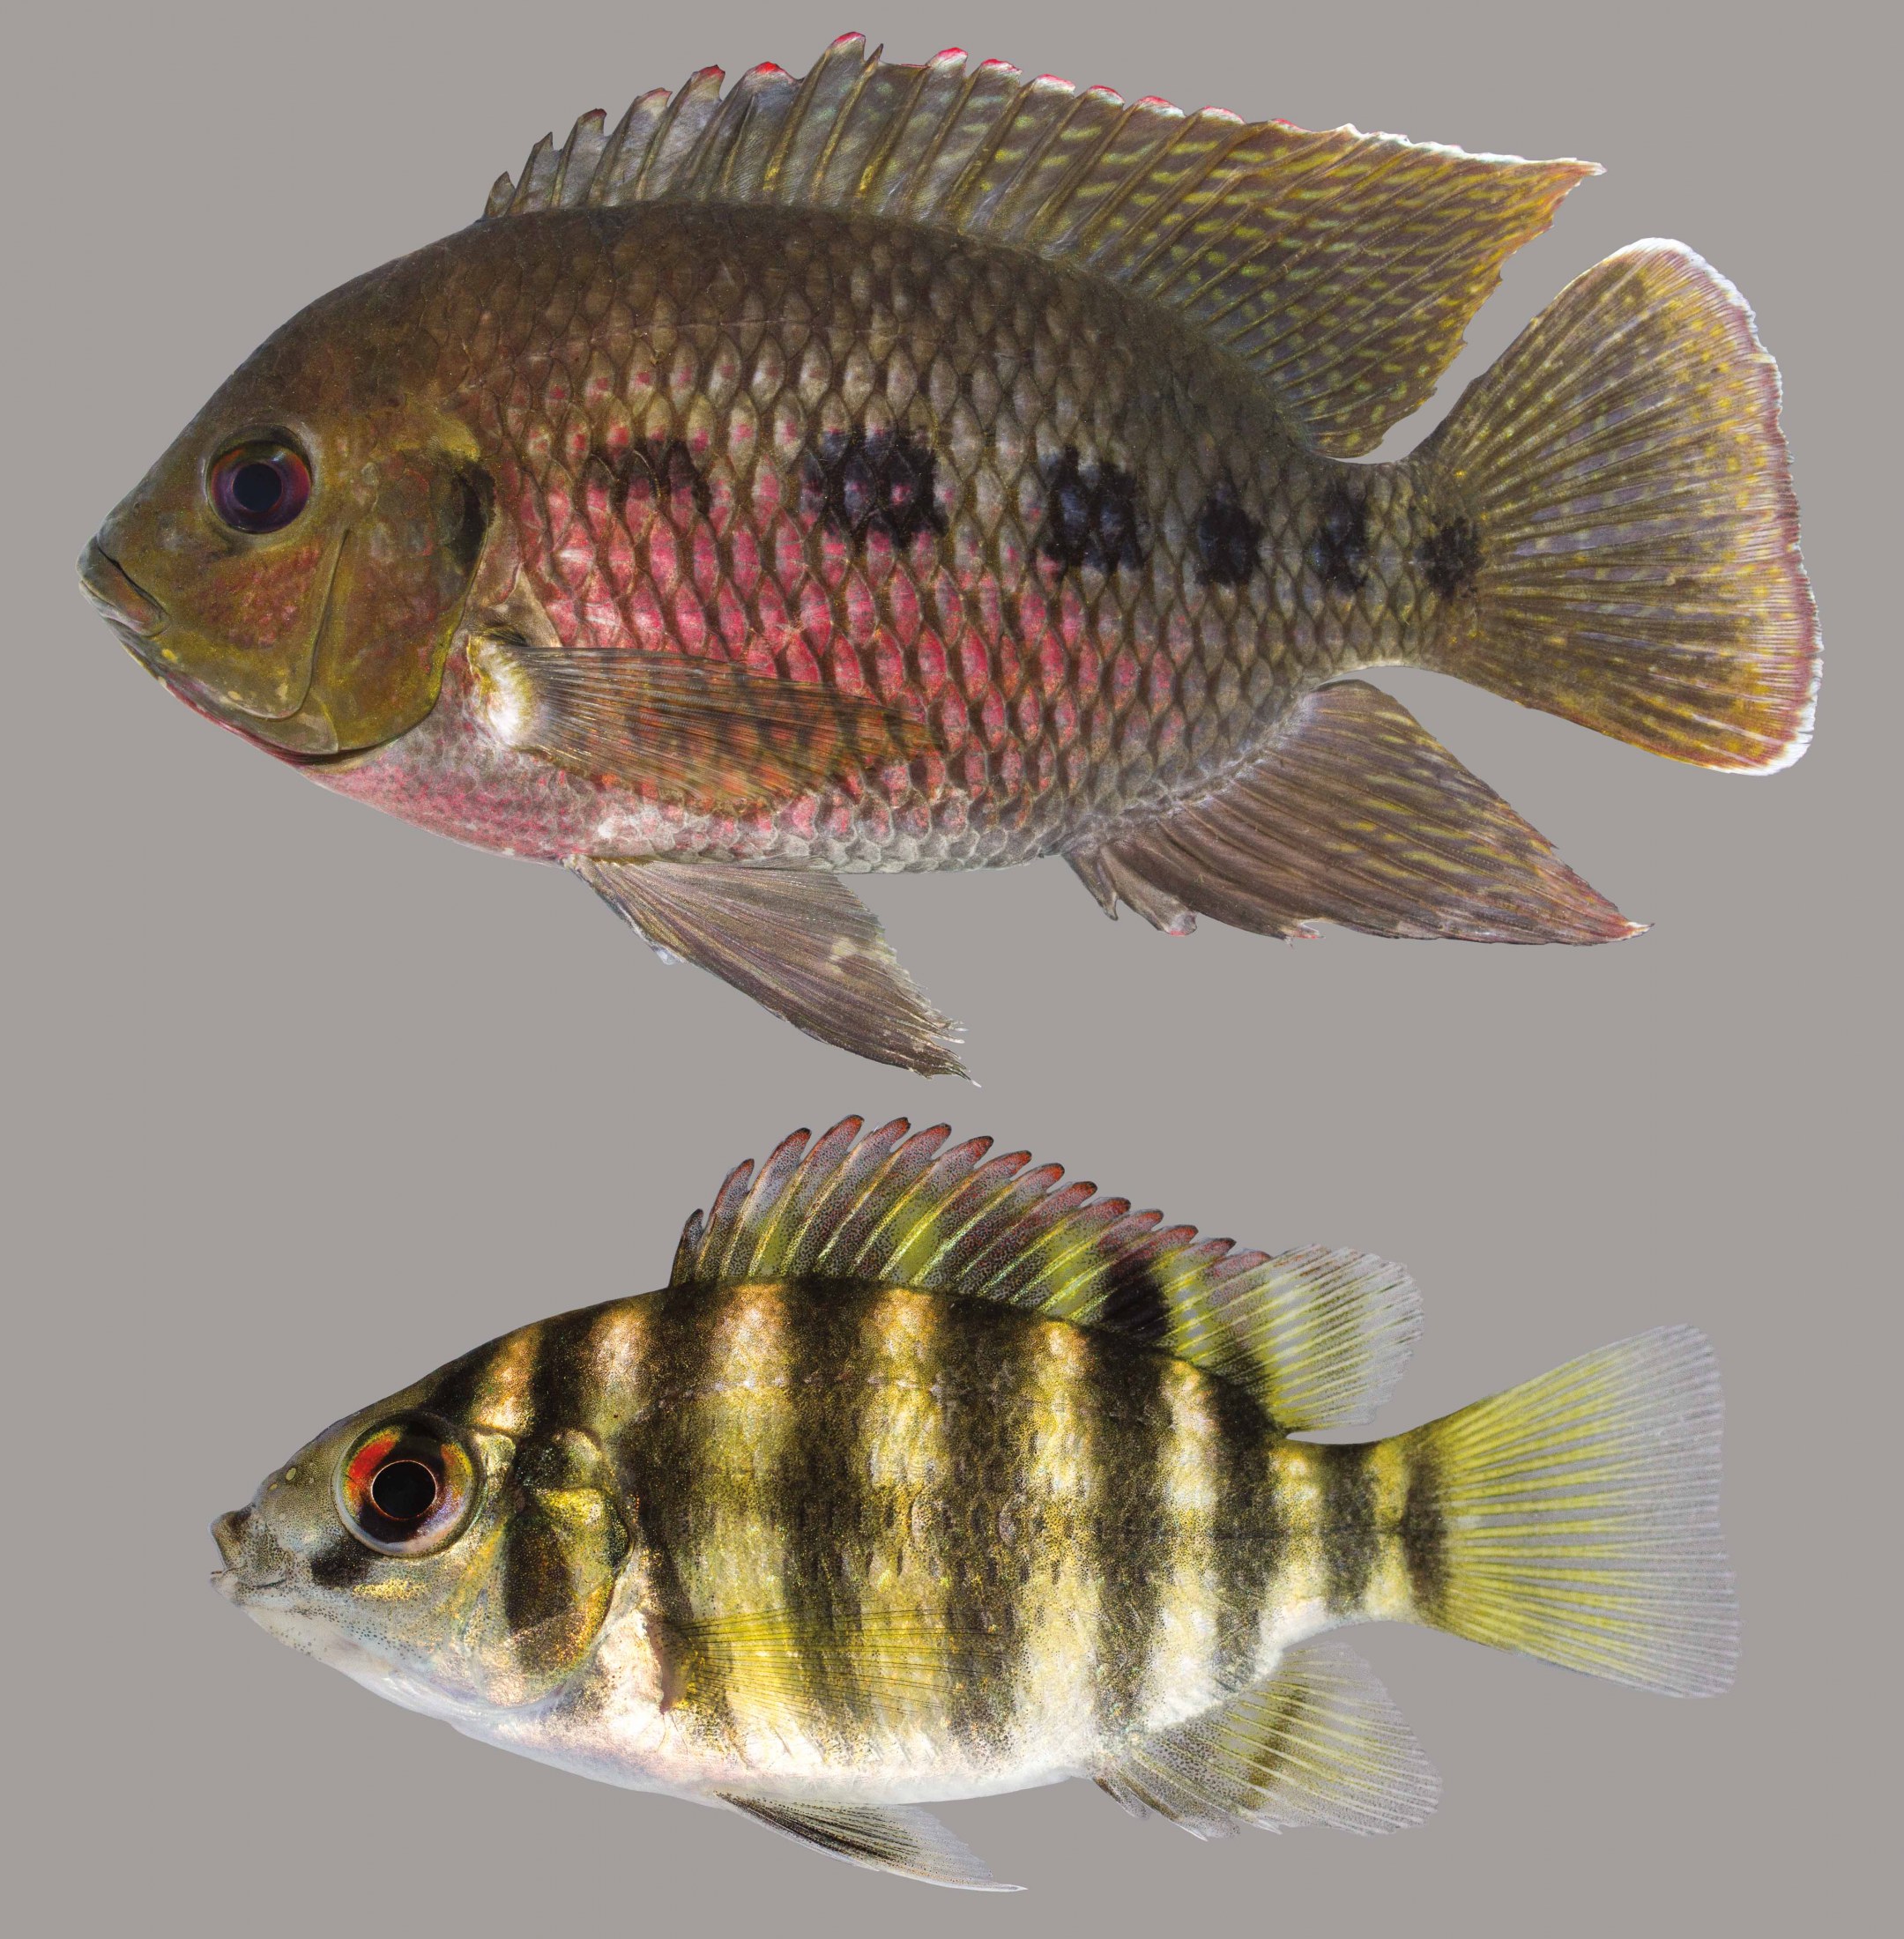 Lateral view of spotted tilapia